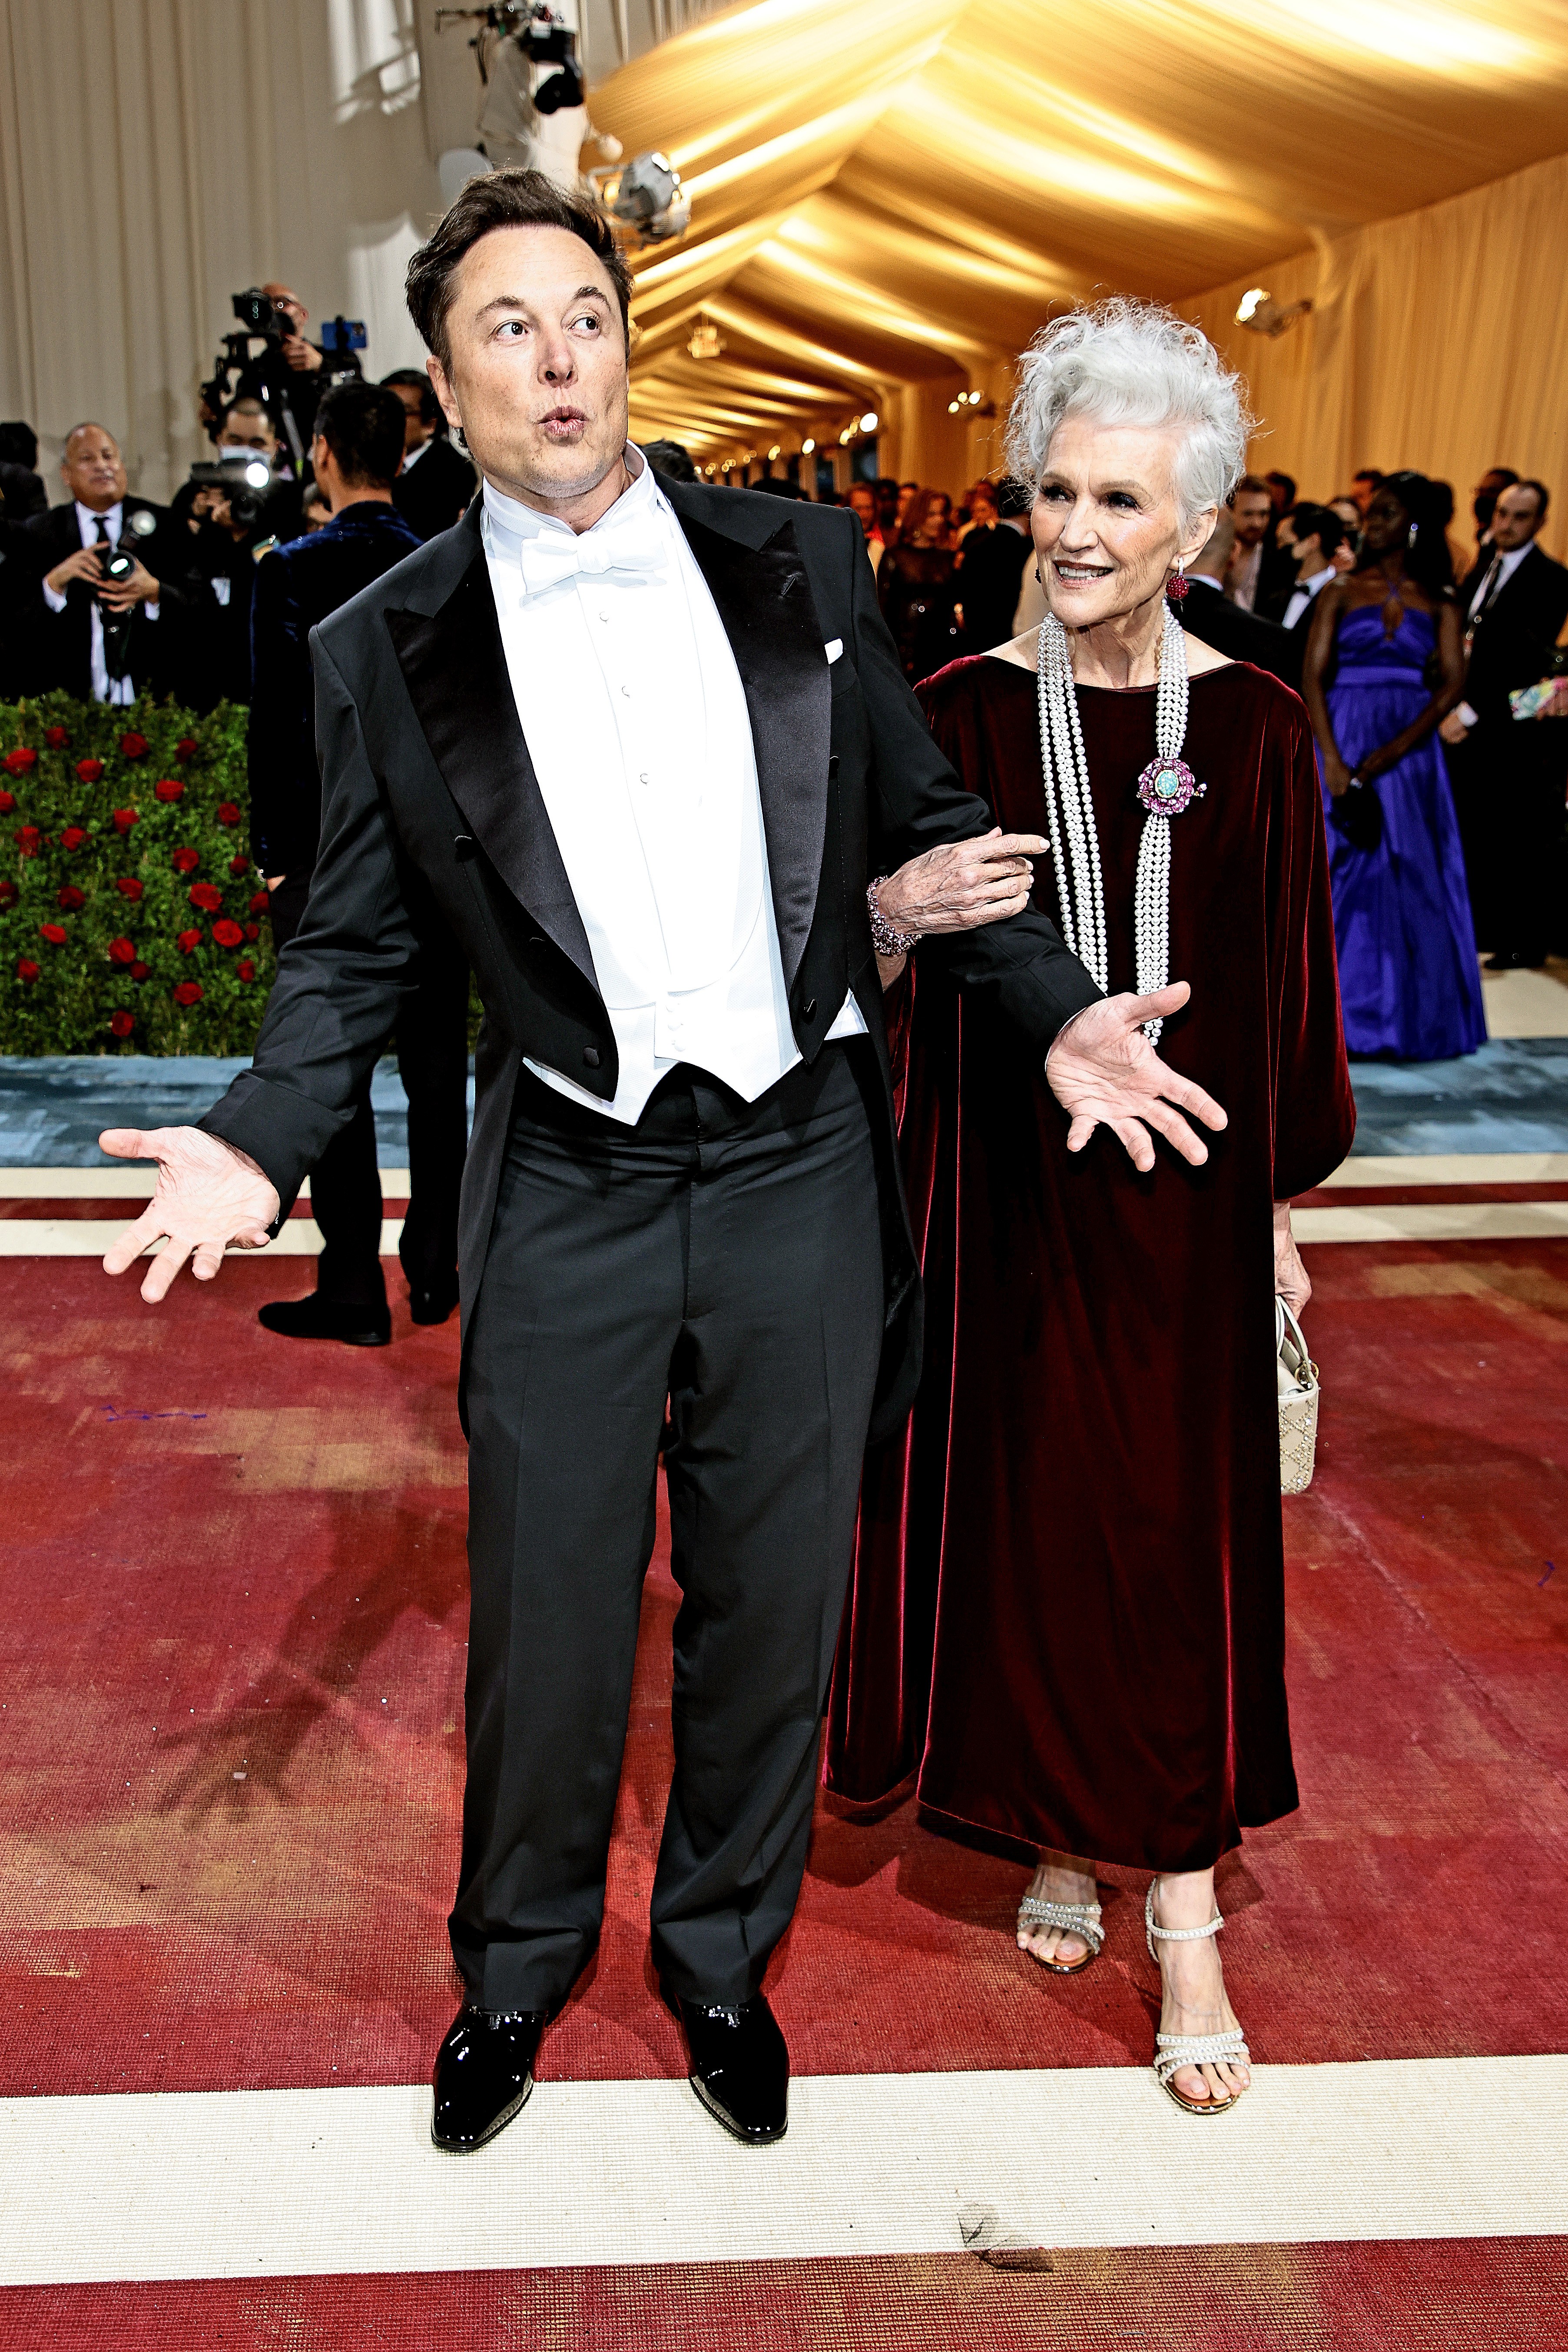 NEW YORK, NEW YORK - MAY 02: (L-R) Elon Musk and Maye Musk attend The 2022 Met Gala Celebrating "In America: An Anthology of Fashion" at The Metropolitan Museum of Art on May 02, 2022 in New York City. (Photo by Dimitrios Kambouris/Getty Images for The Me (Foto: Getty Images for The Met Museum/)